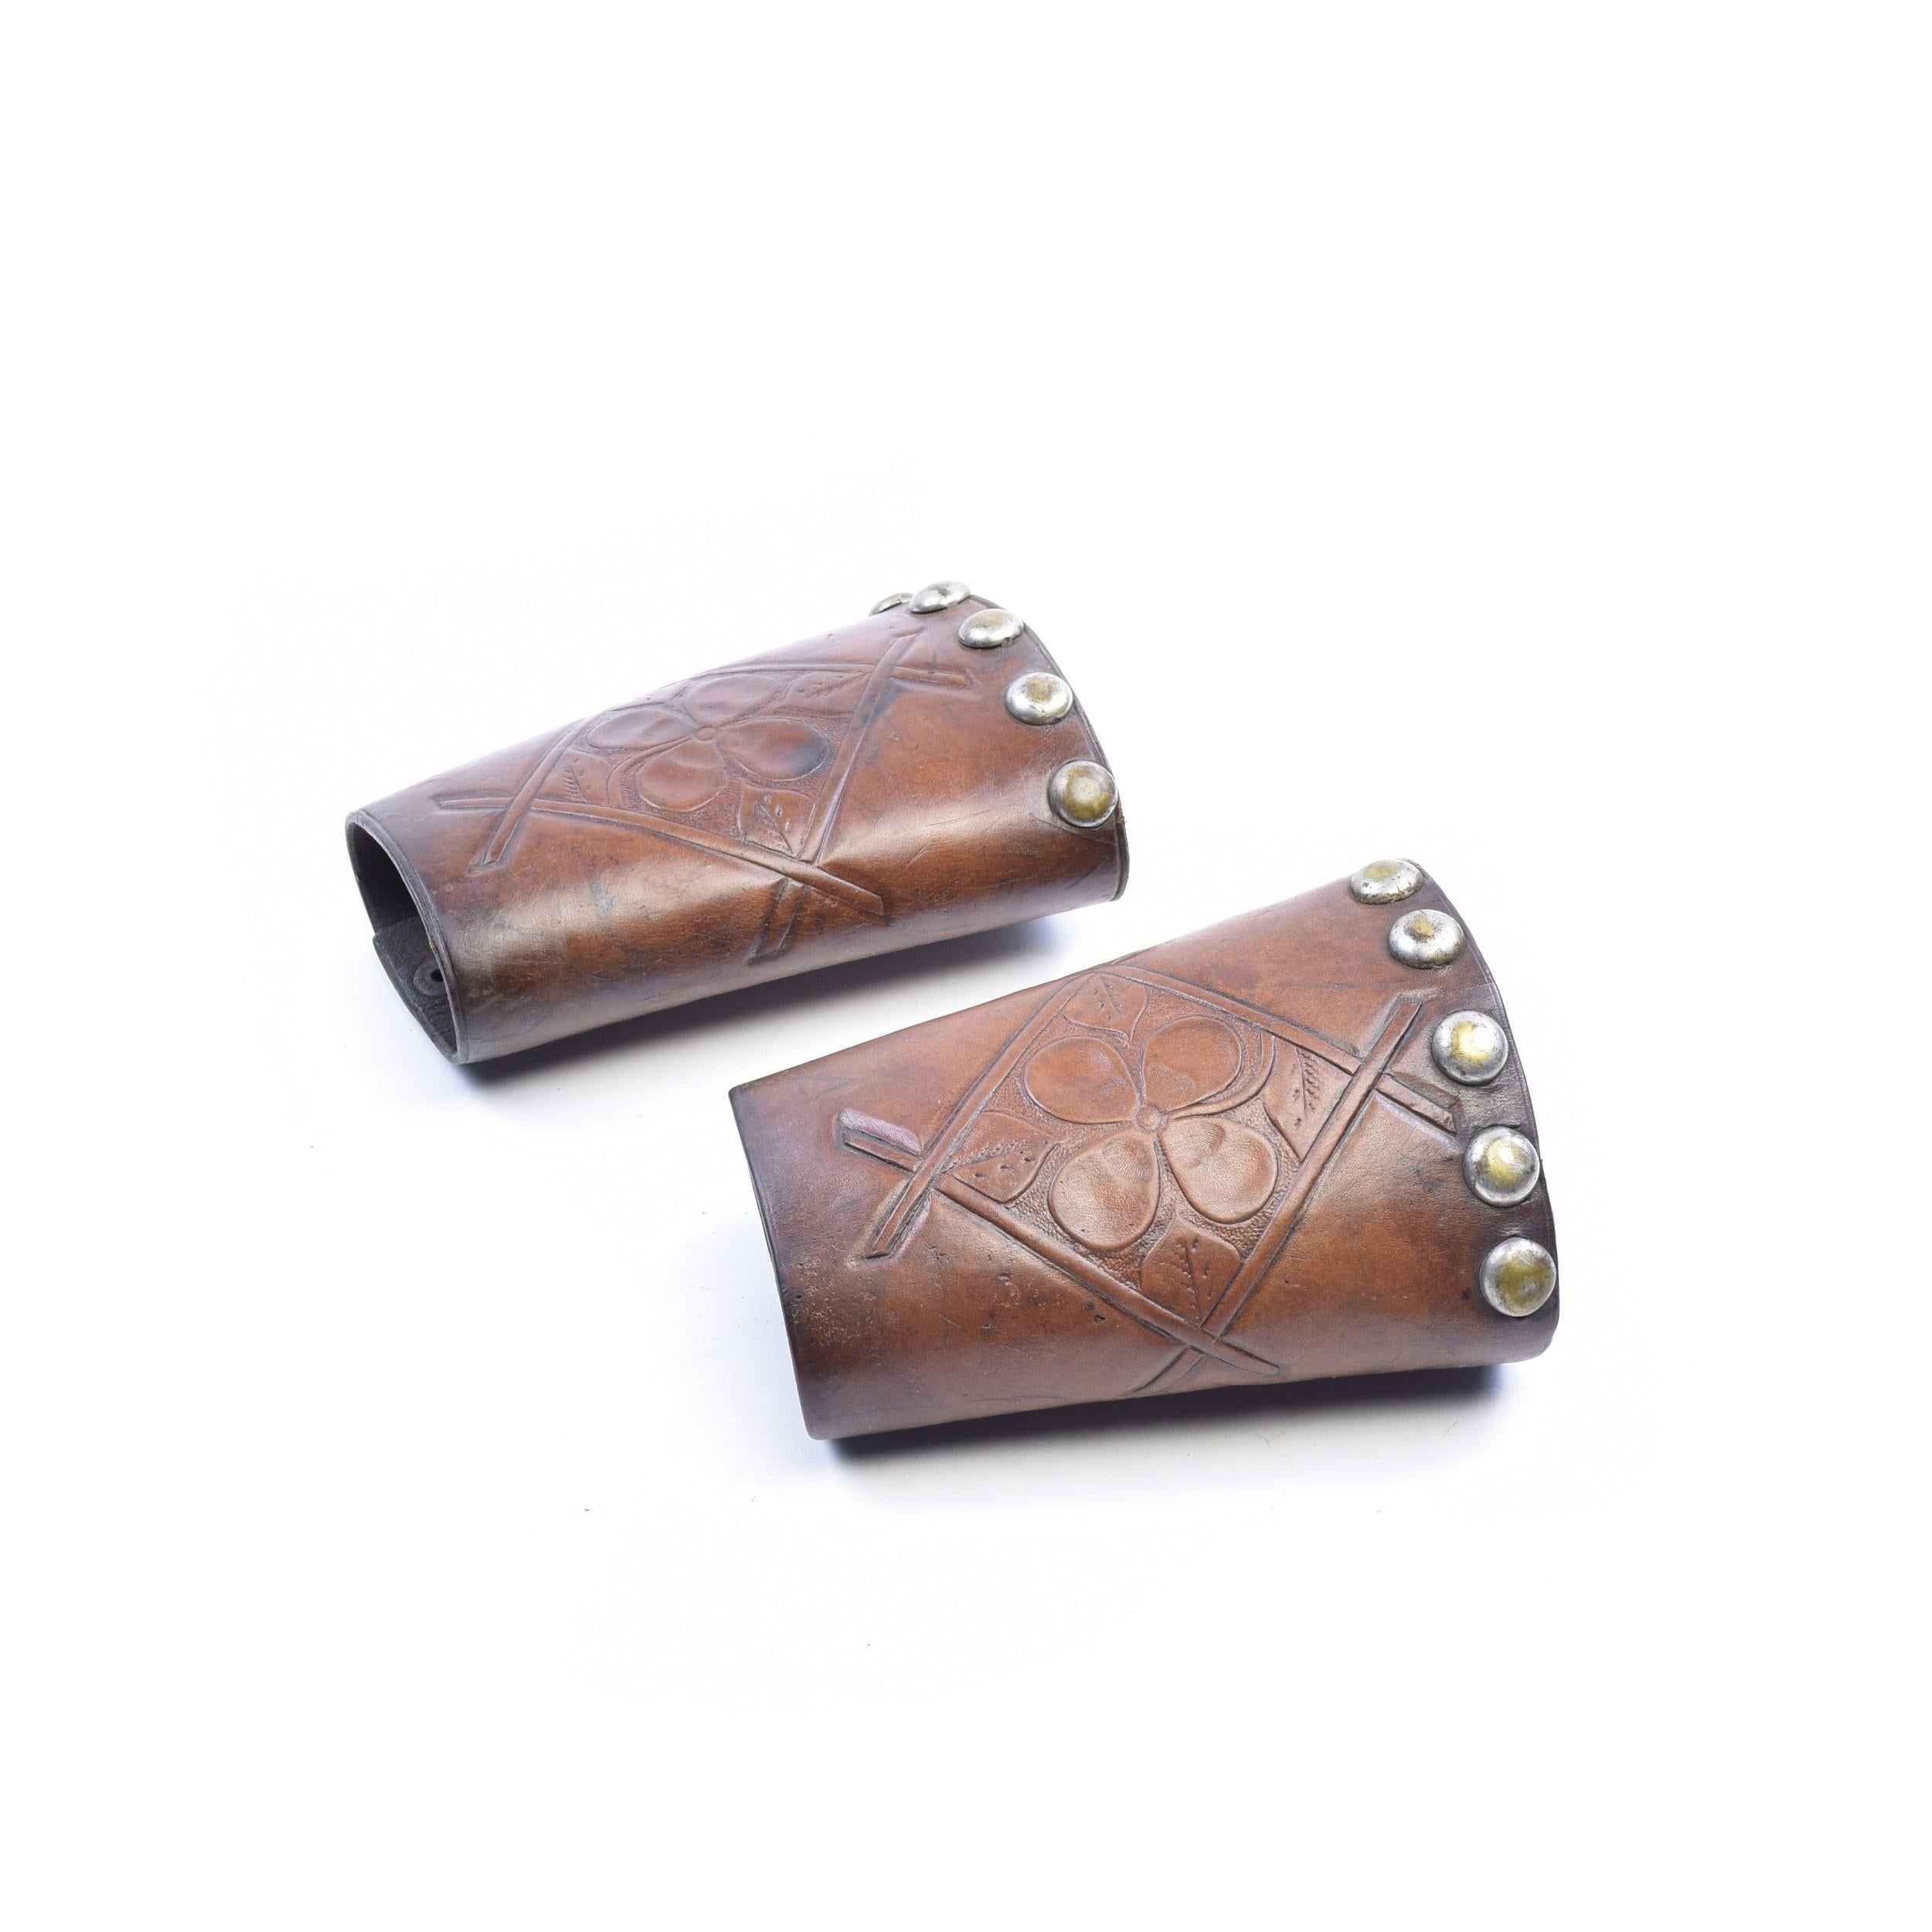 Zenith, Co 4-leaf clover leather and stud cowboy/cowgirl cuffs (not maker marked).

PERIOD: Early 20th Century
ORIGIN: Colorado, United States
SIZE: 6 1/4